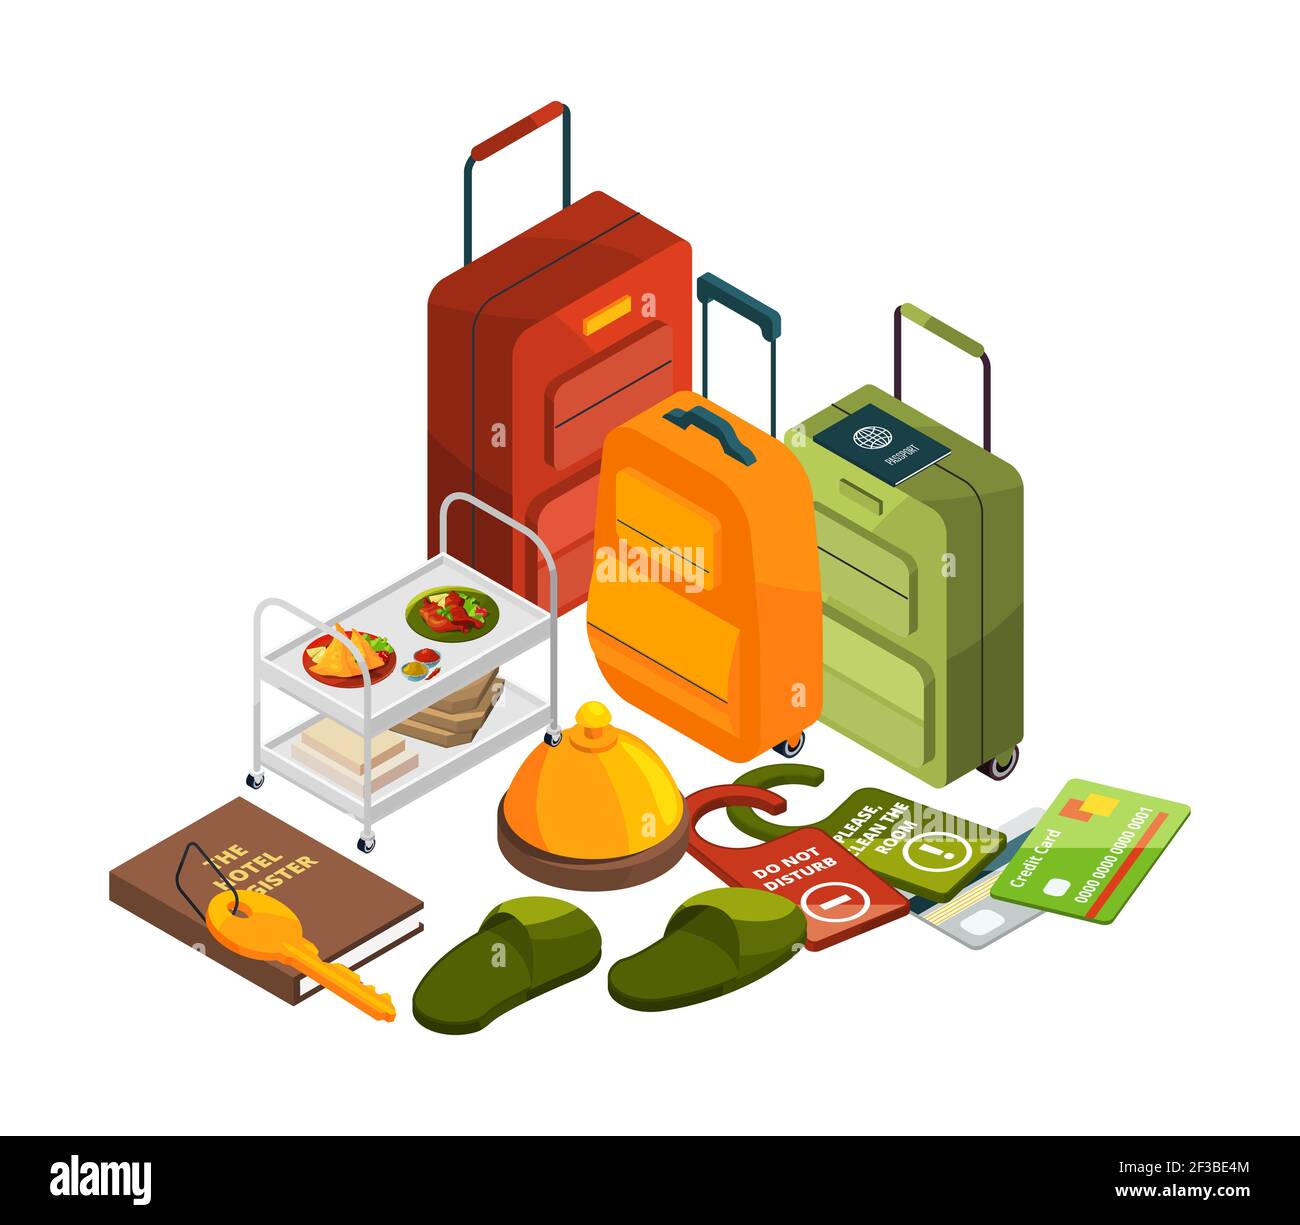 Isometric hotel elements. Vector all inclusive concept. Travel, tourism industry illustration Stock Vector